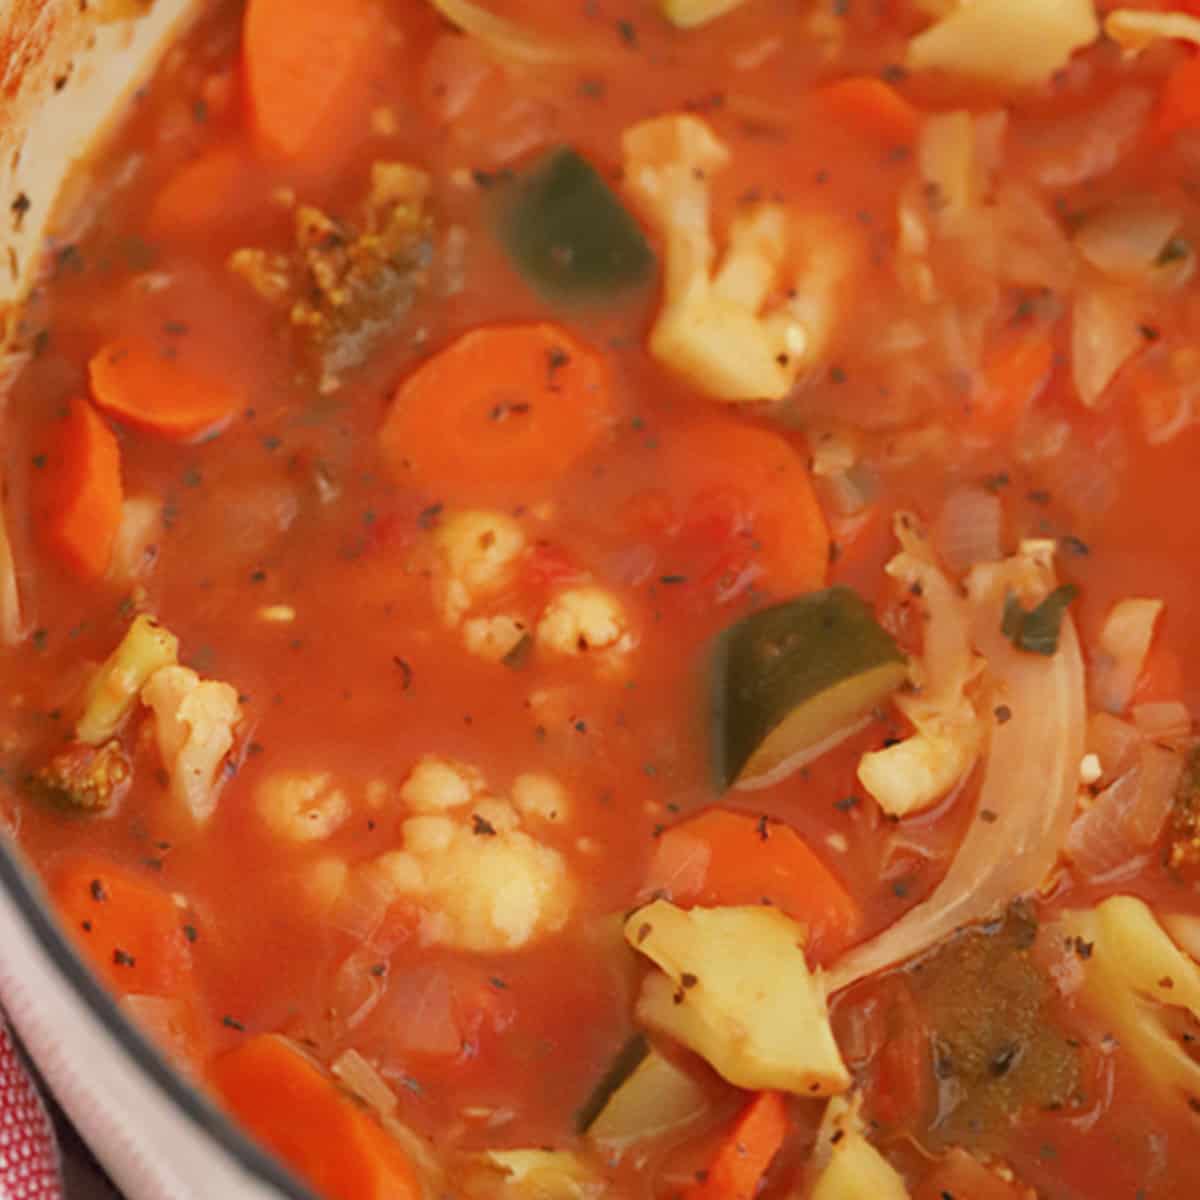 best vegetable soup recipe, cabbage soup recipes, recipes for vegetable soup